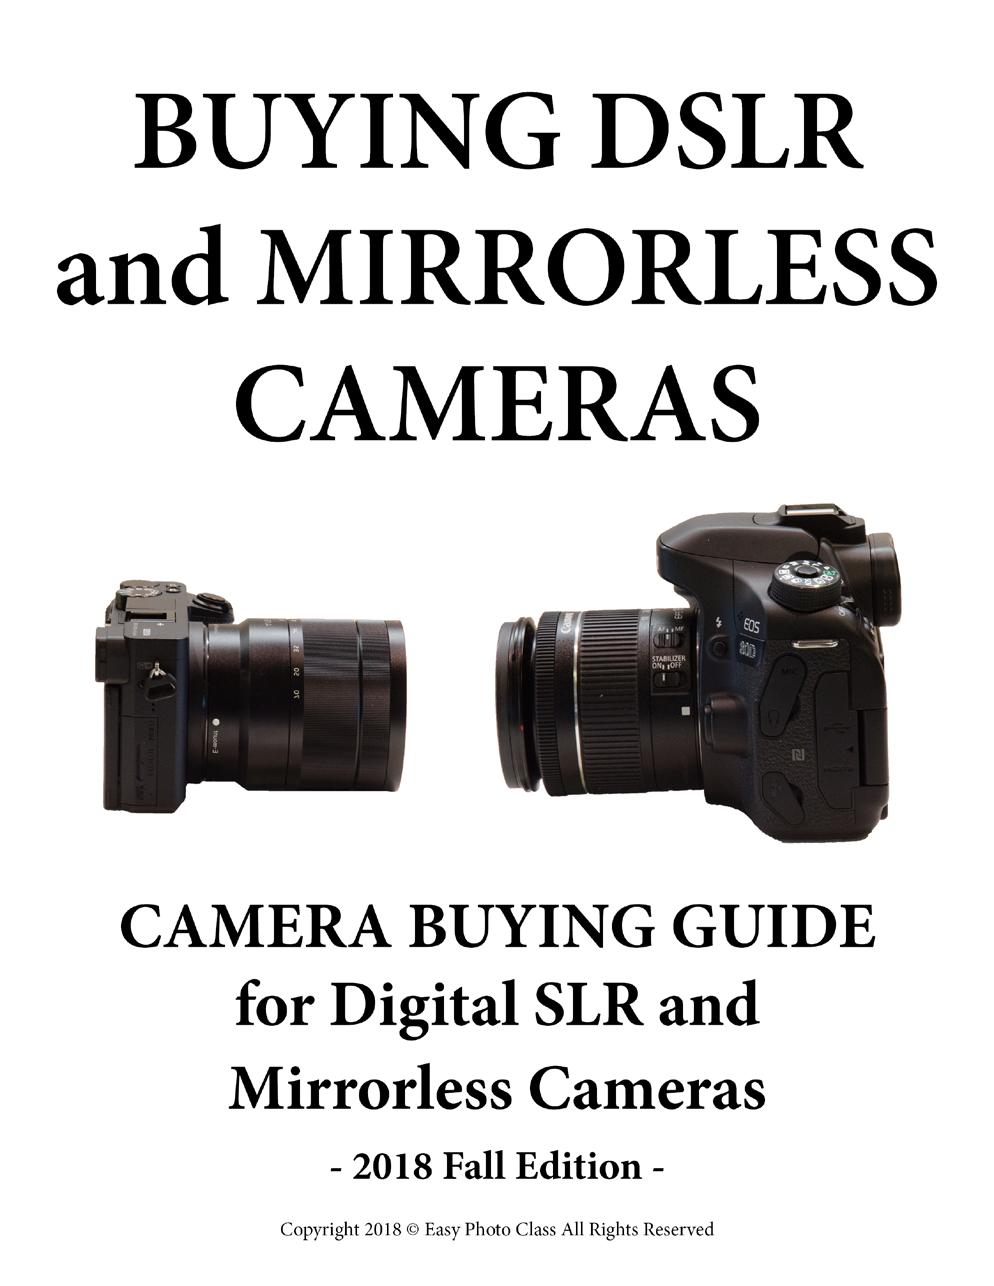 Use Our Camera & Lens Guides to Choose a Camera